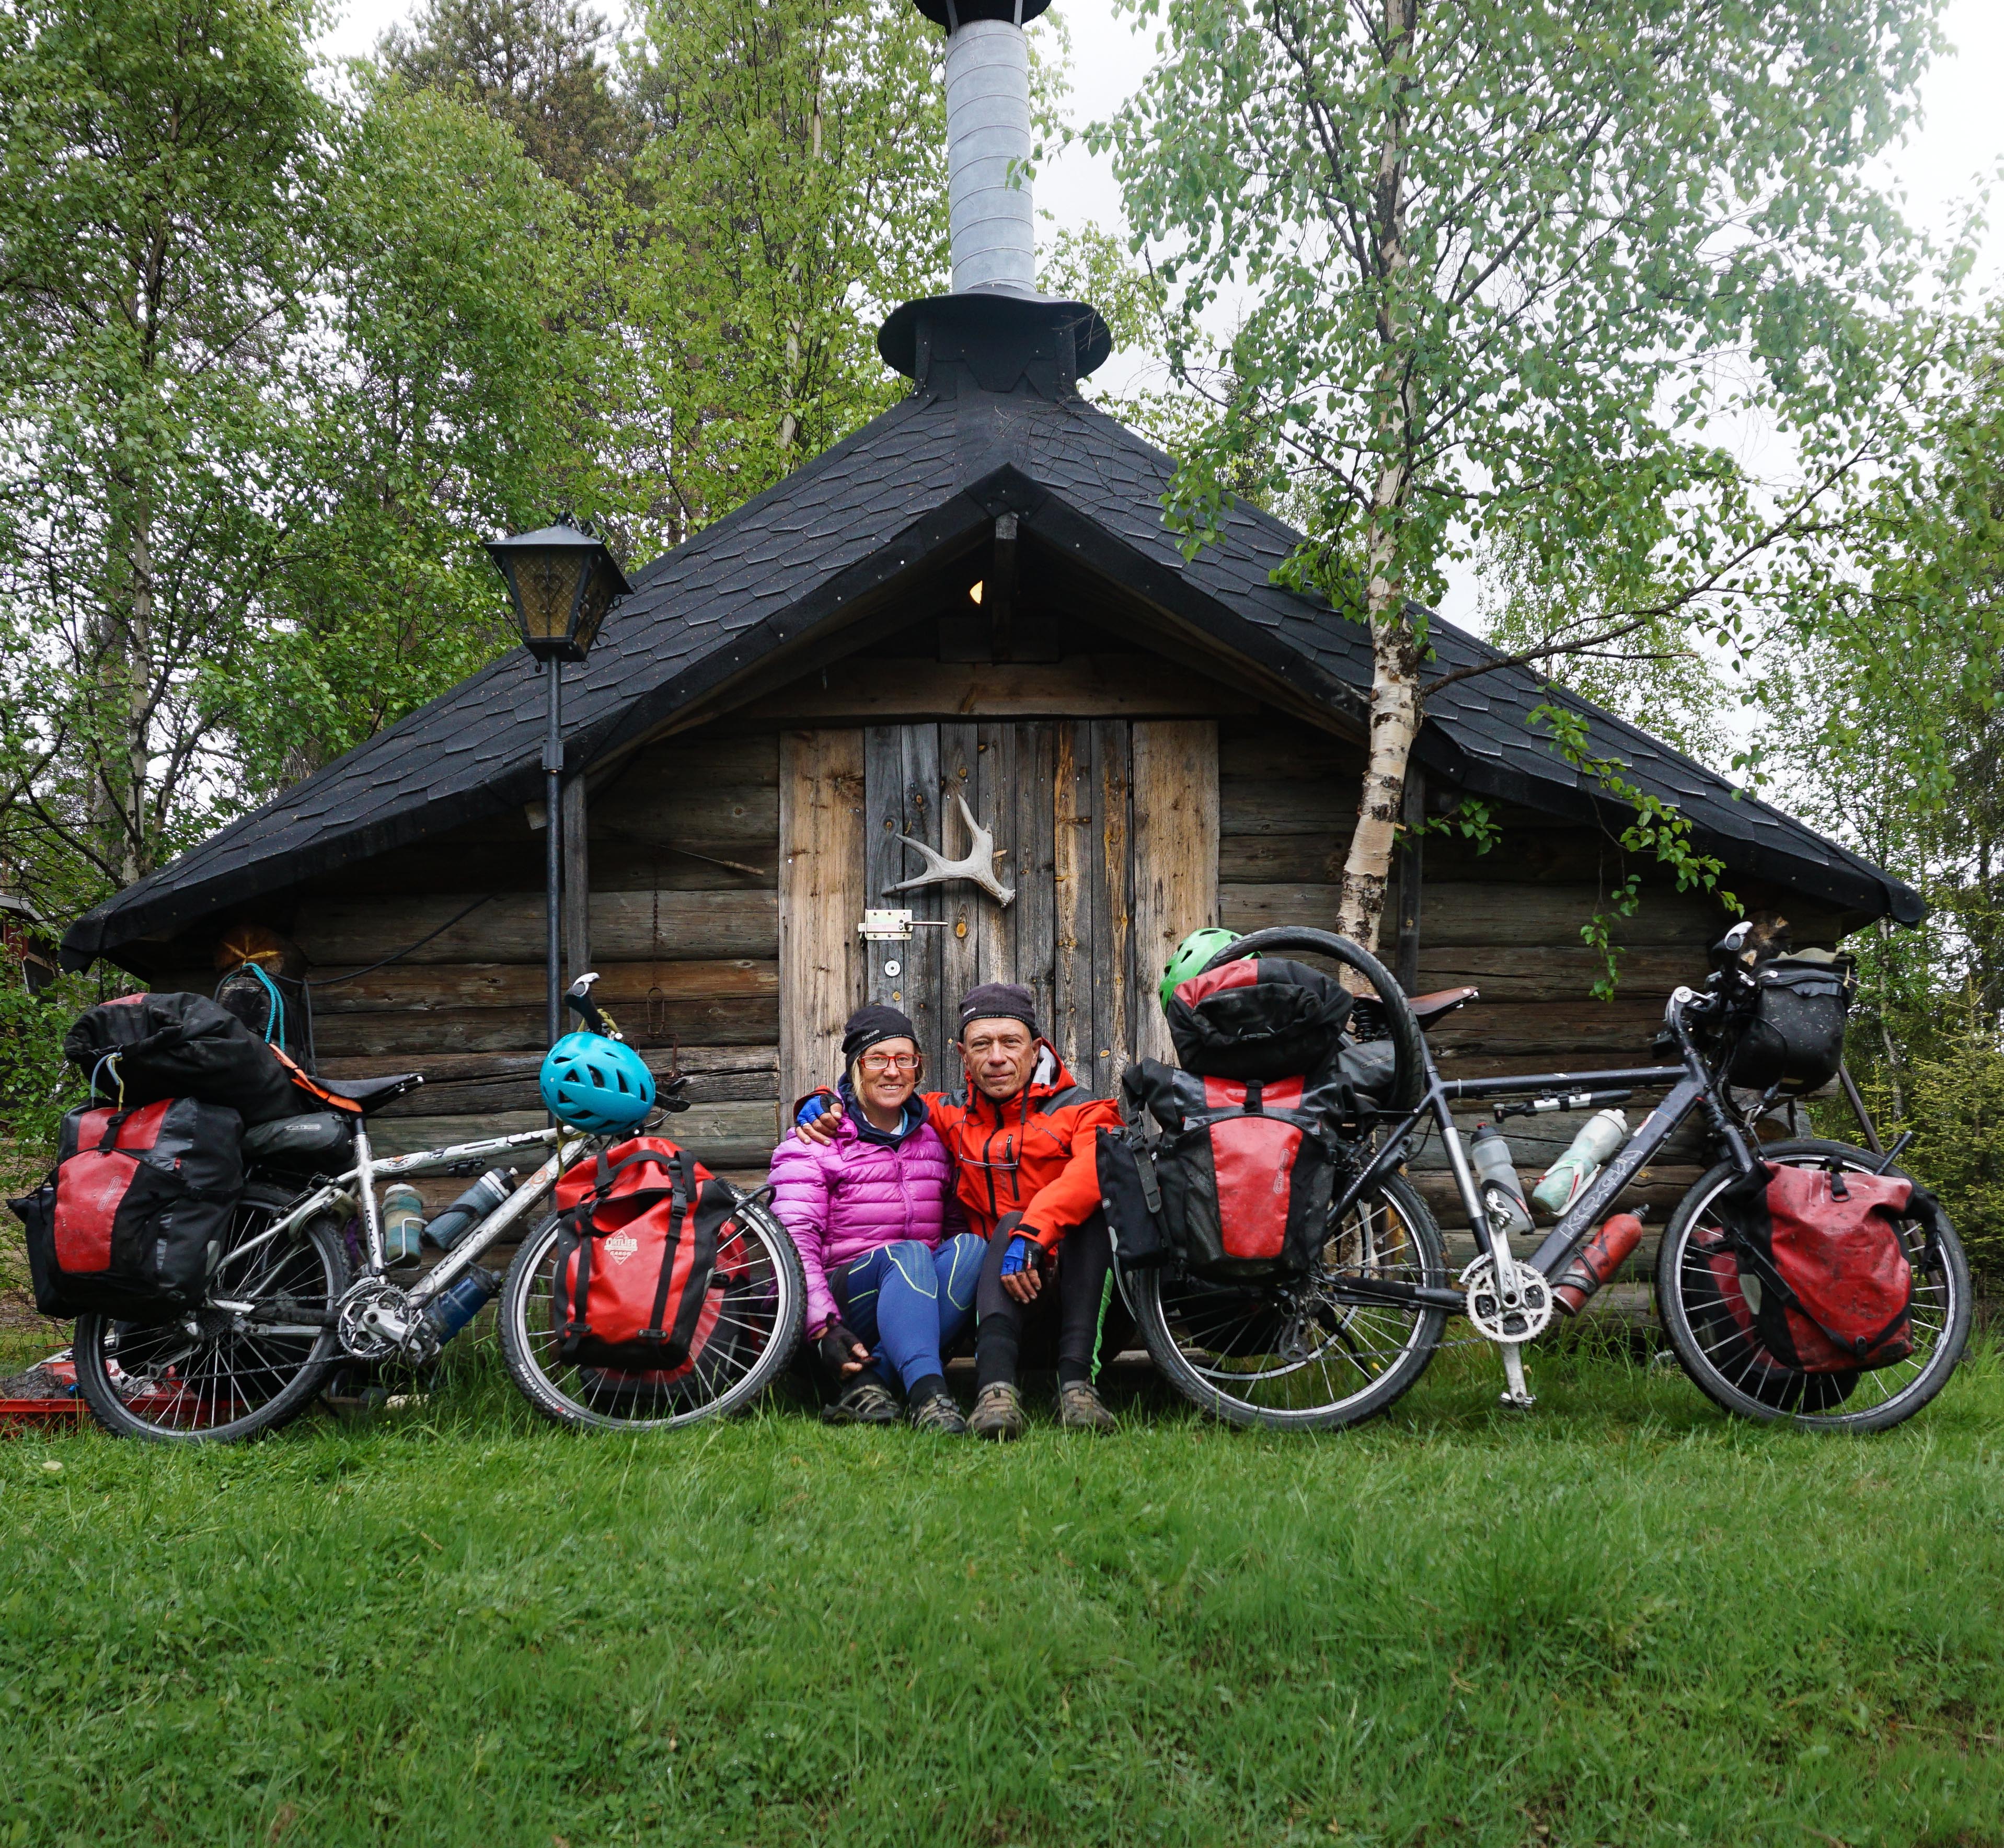 A friendly Finnish family took pity on us and invited us to spend the night in this cozy cabin. I keep asking myself when our luck is going to run out.